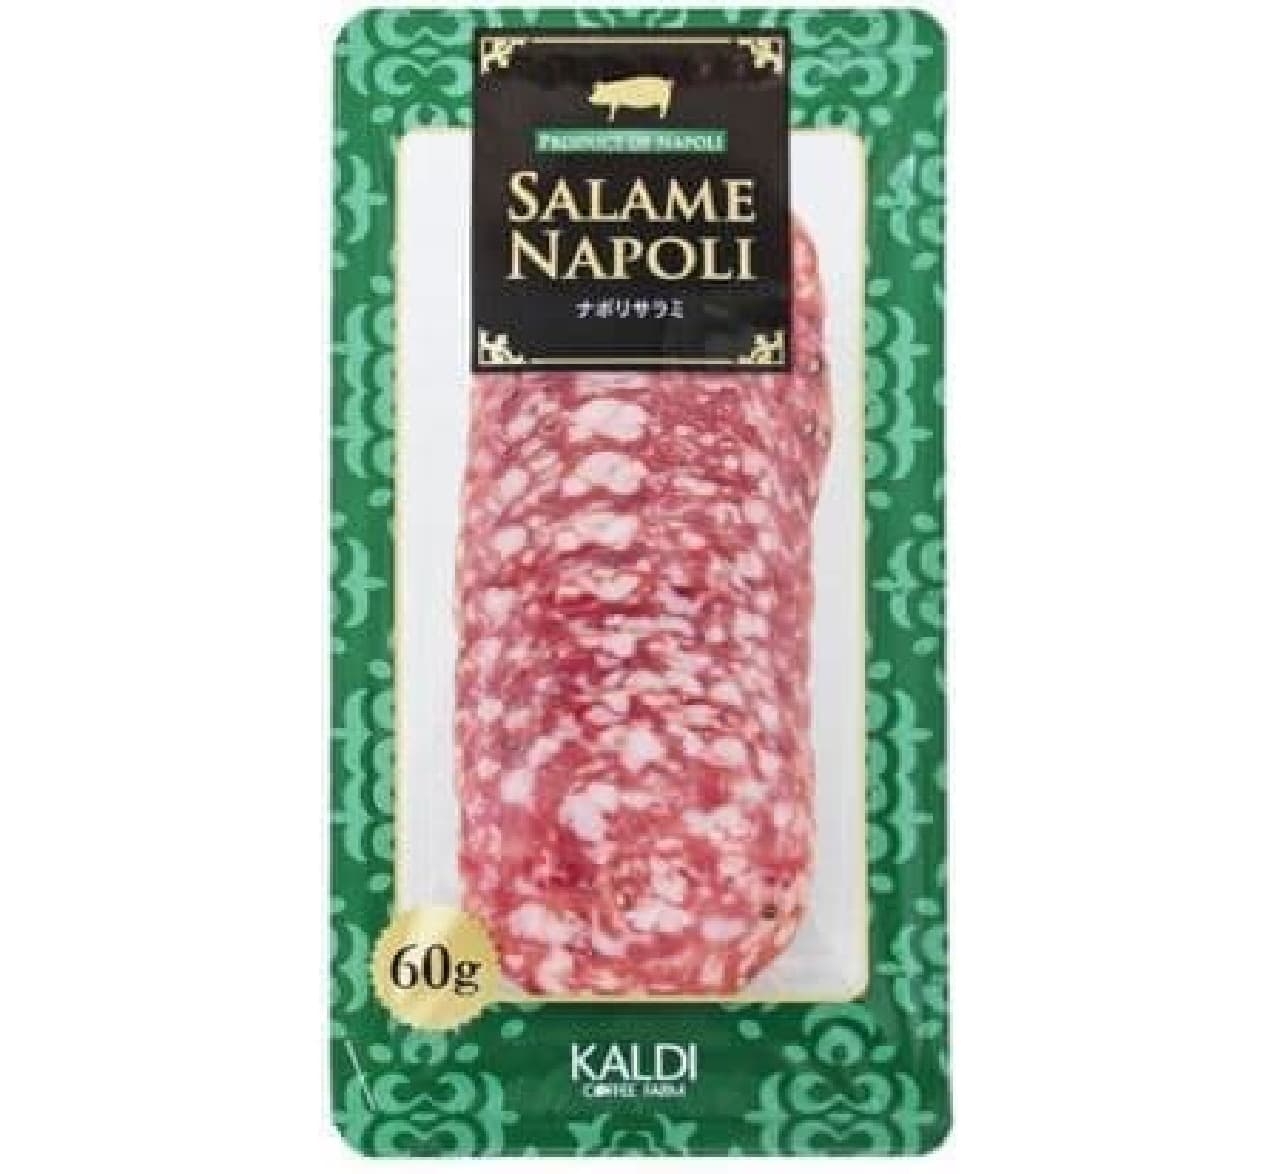 "Naples salami slice" is a southern Italian salami fermented with lactic acid bacteria.